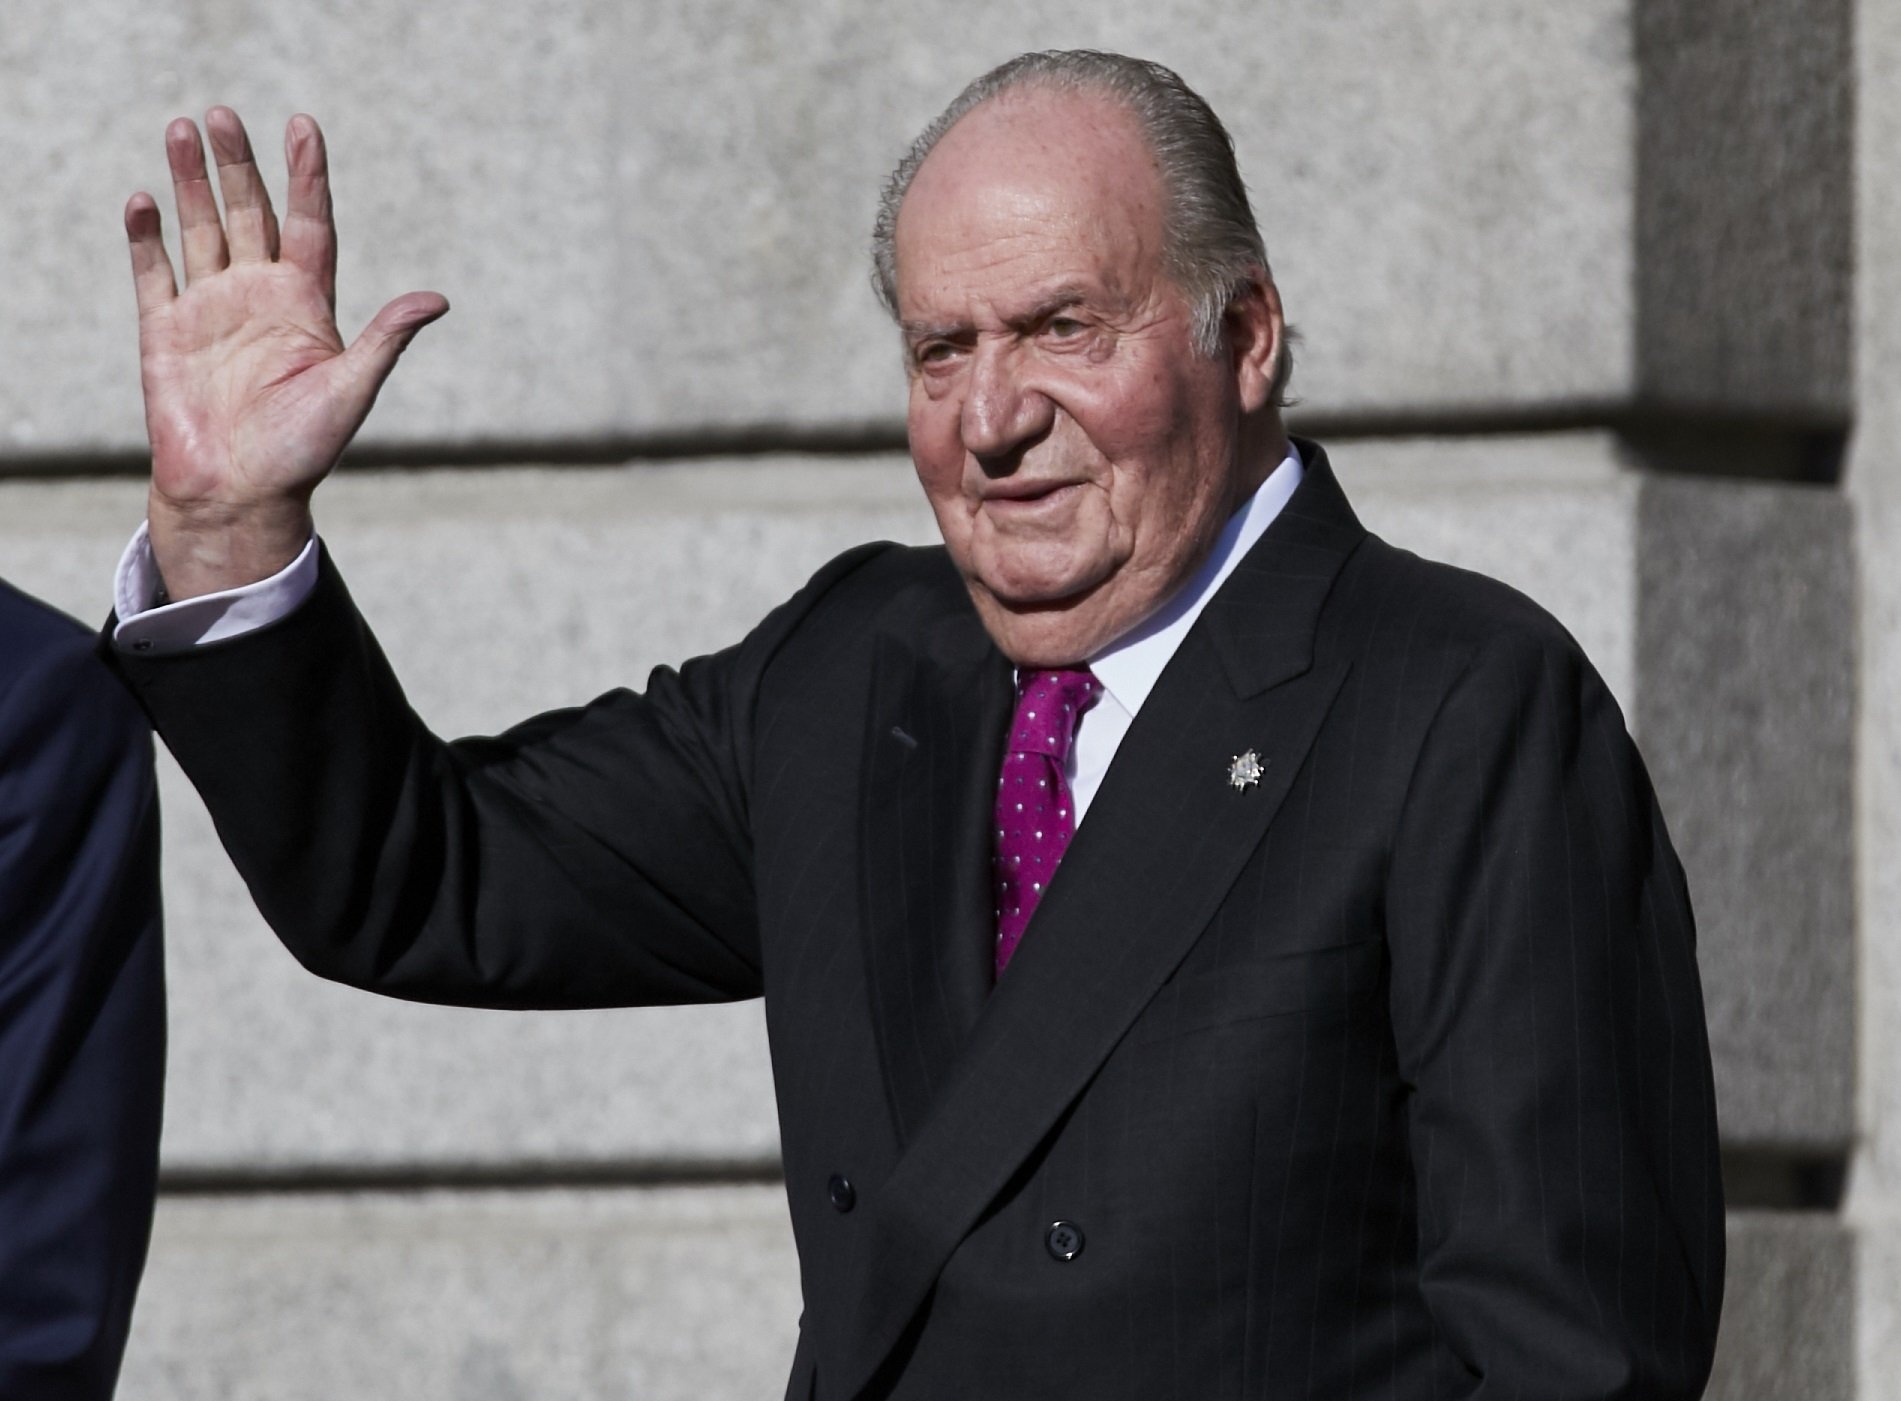 Juan Carlos I wants to come home (but under his own conditions)